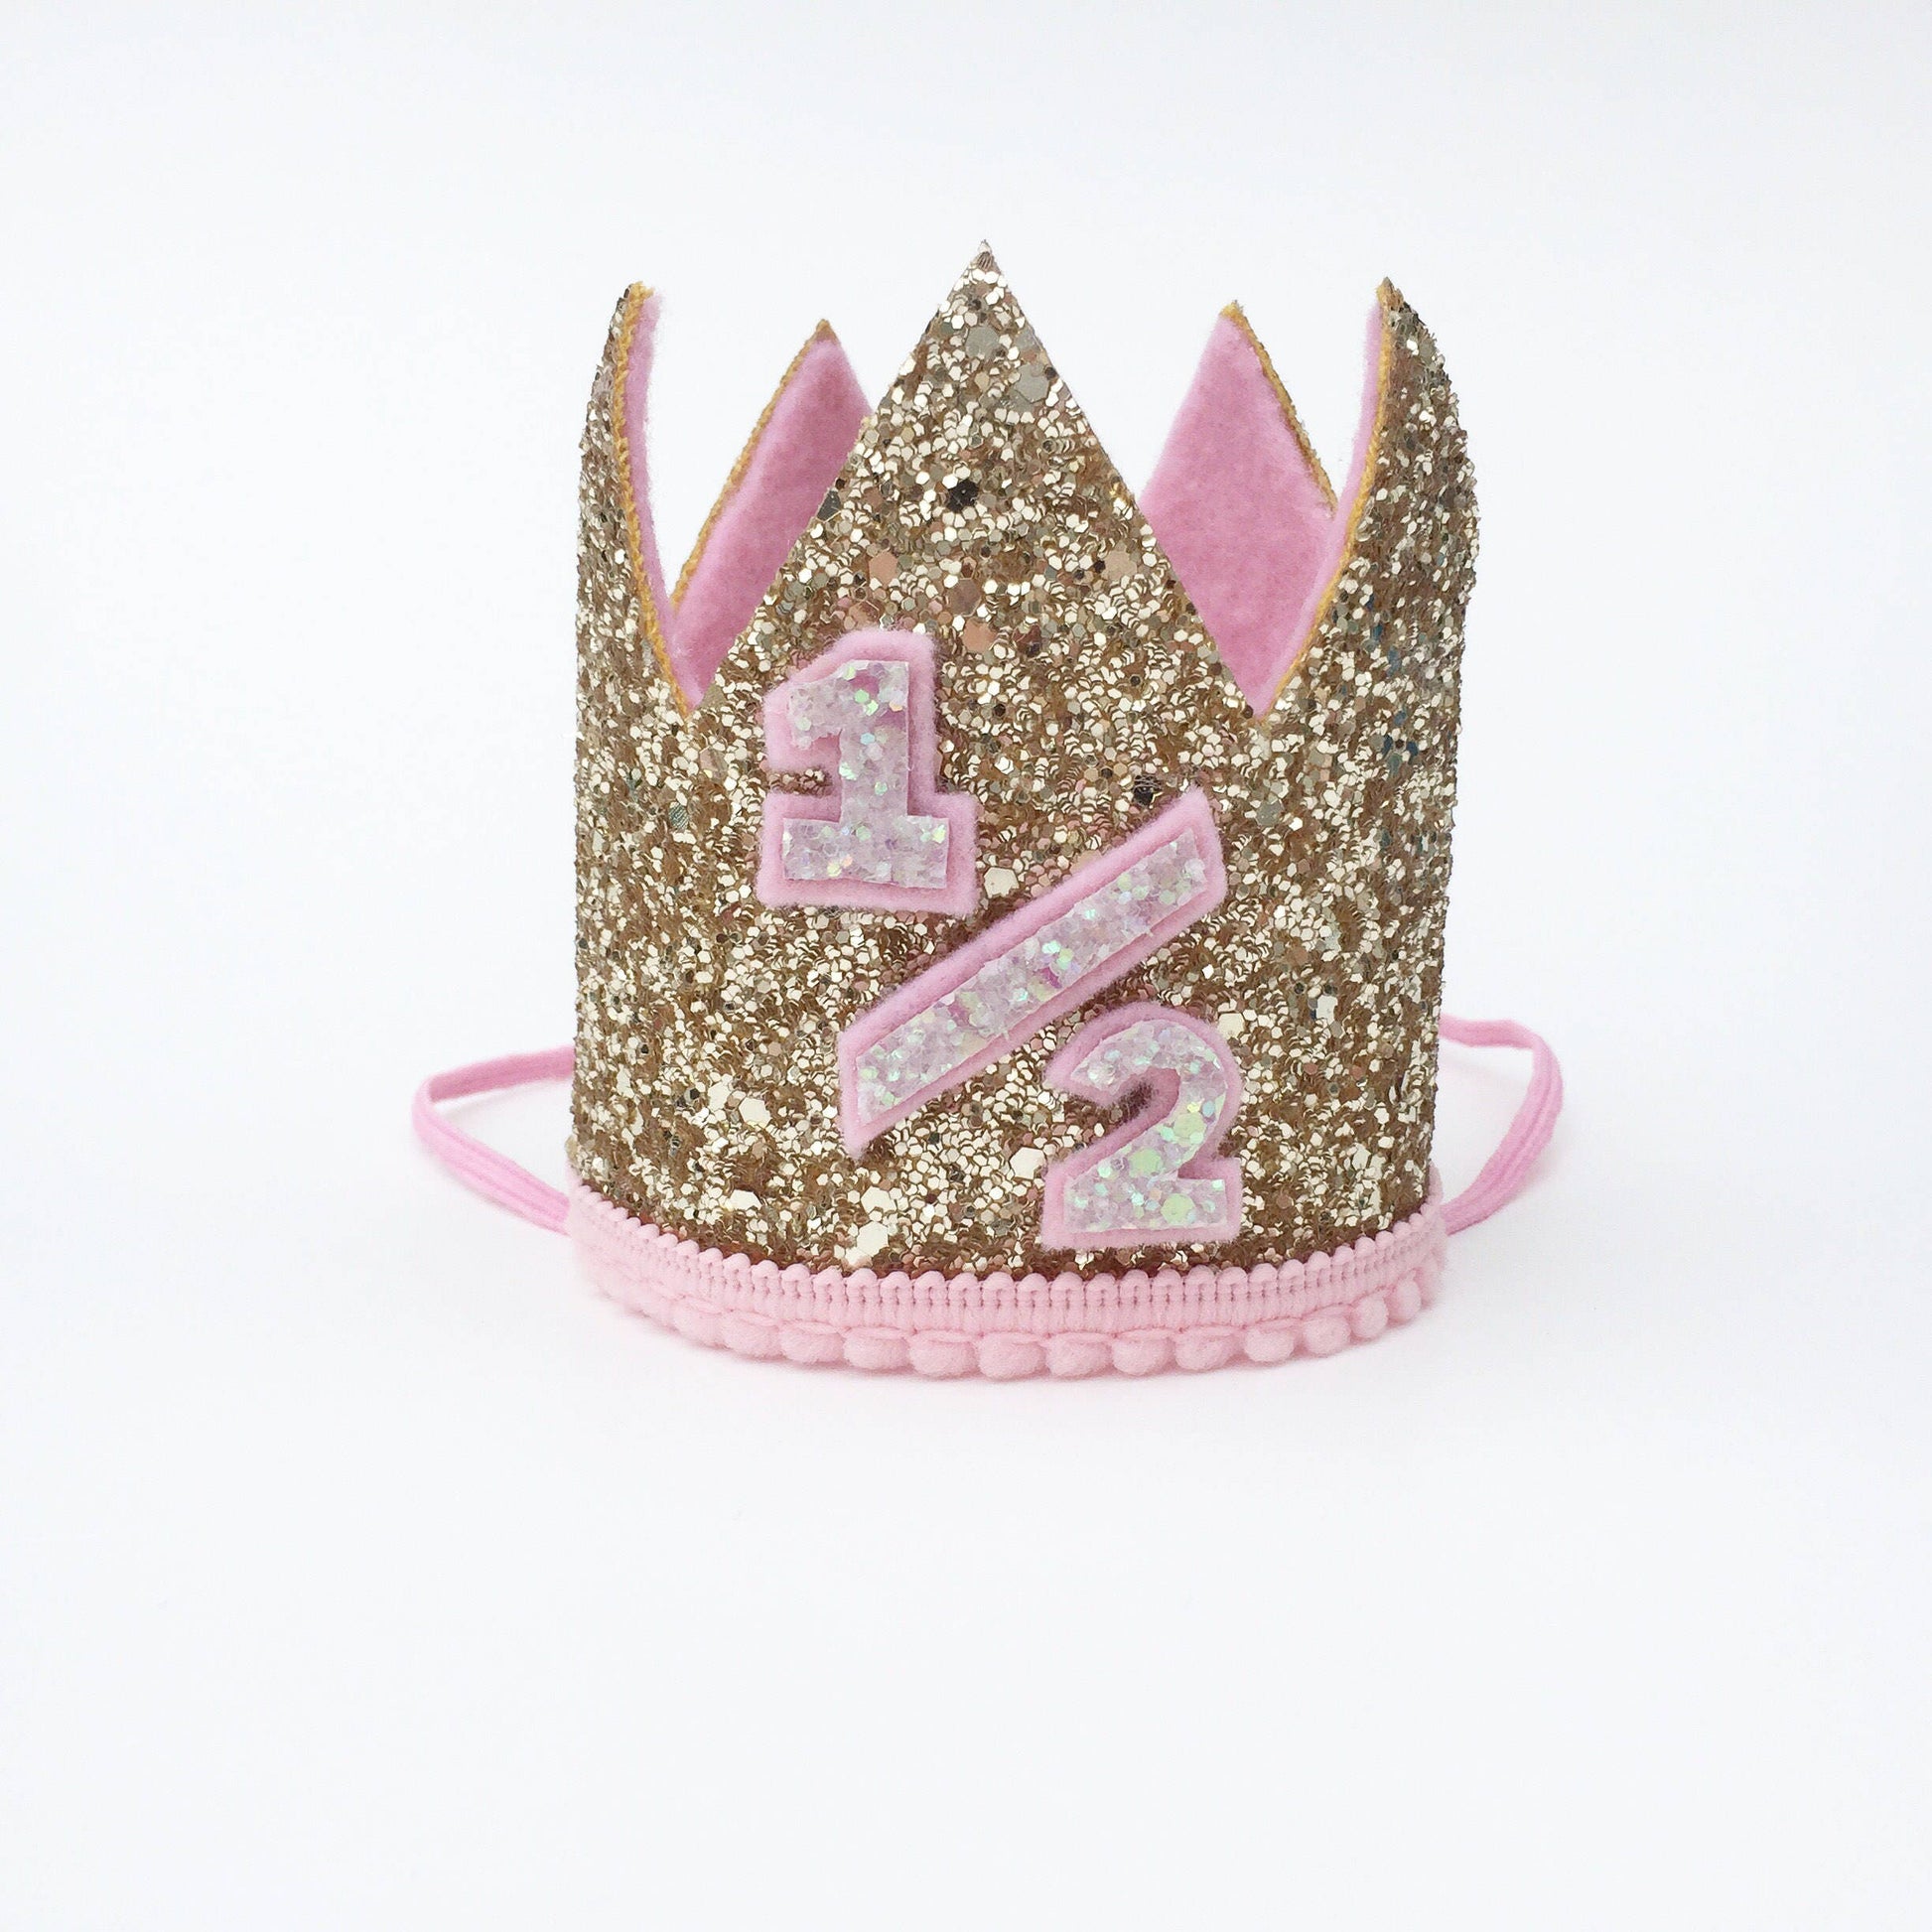 Gold and pink crown